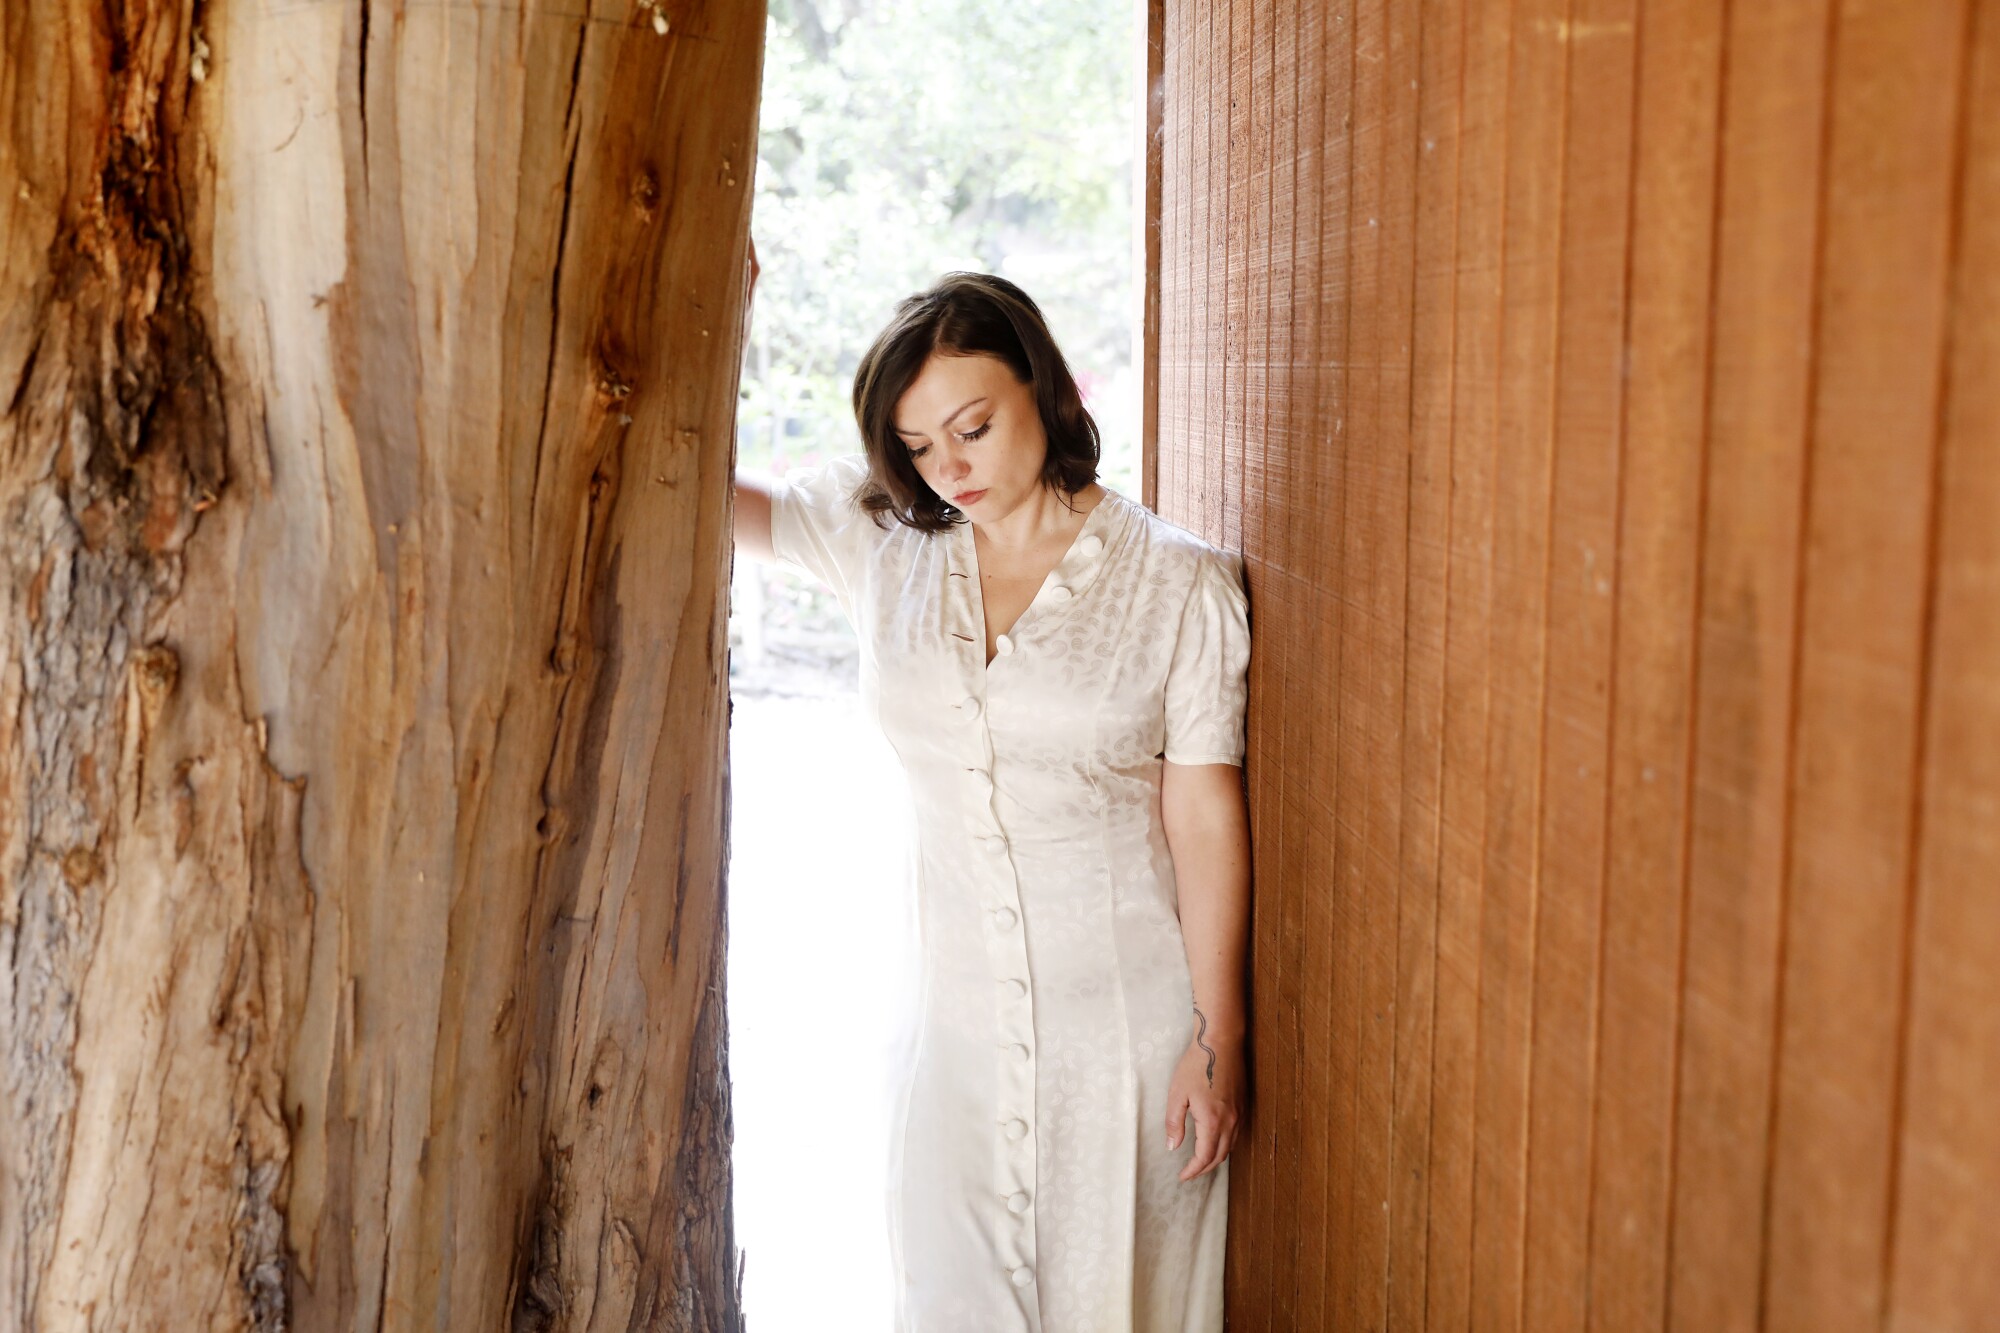 A woman in a white dress leans against a wooden wall and looks down, sullen